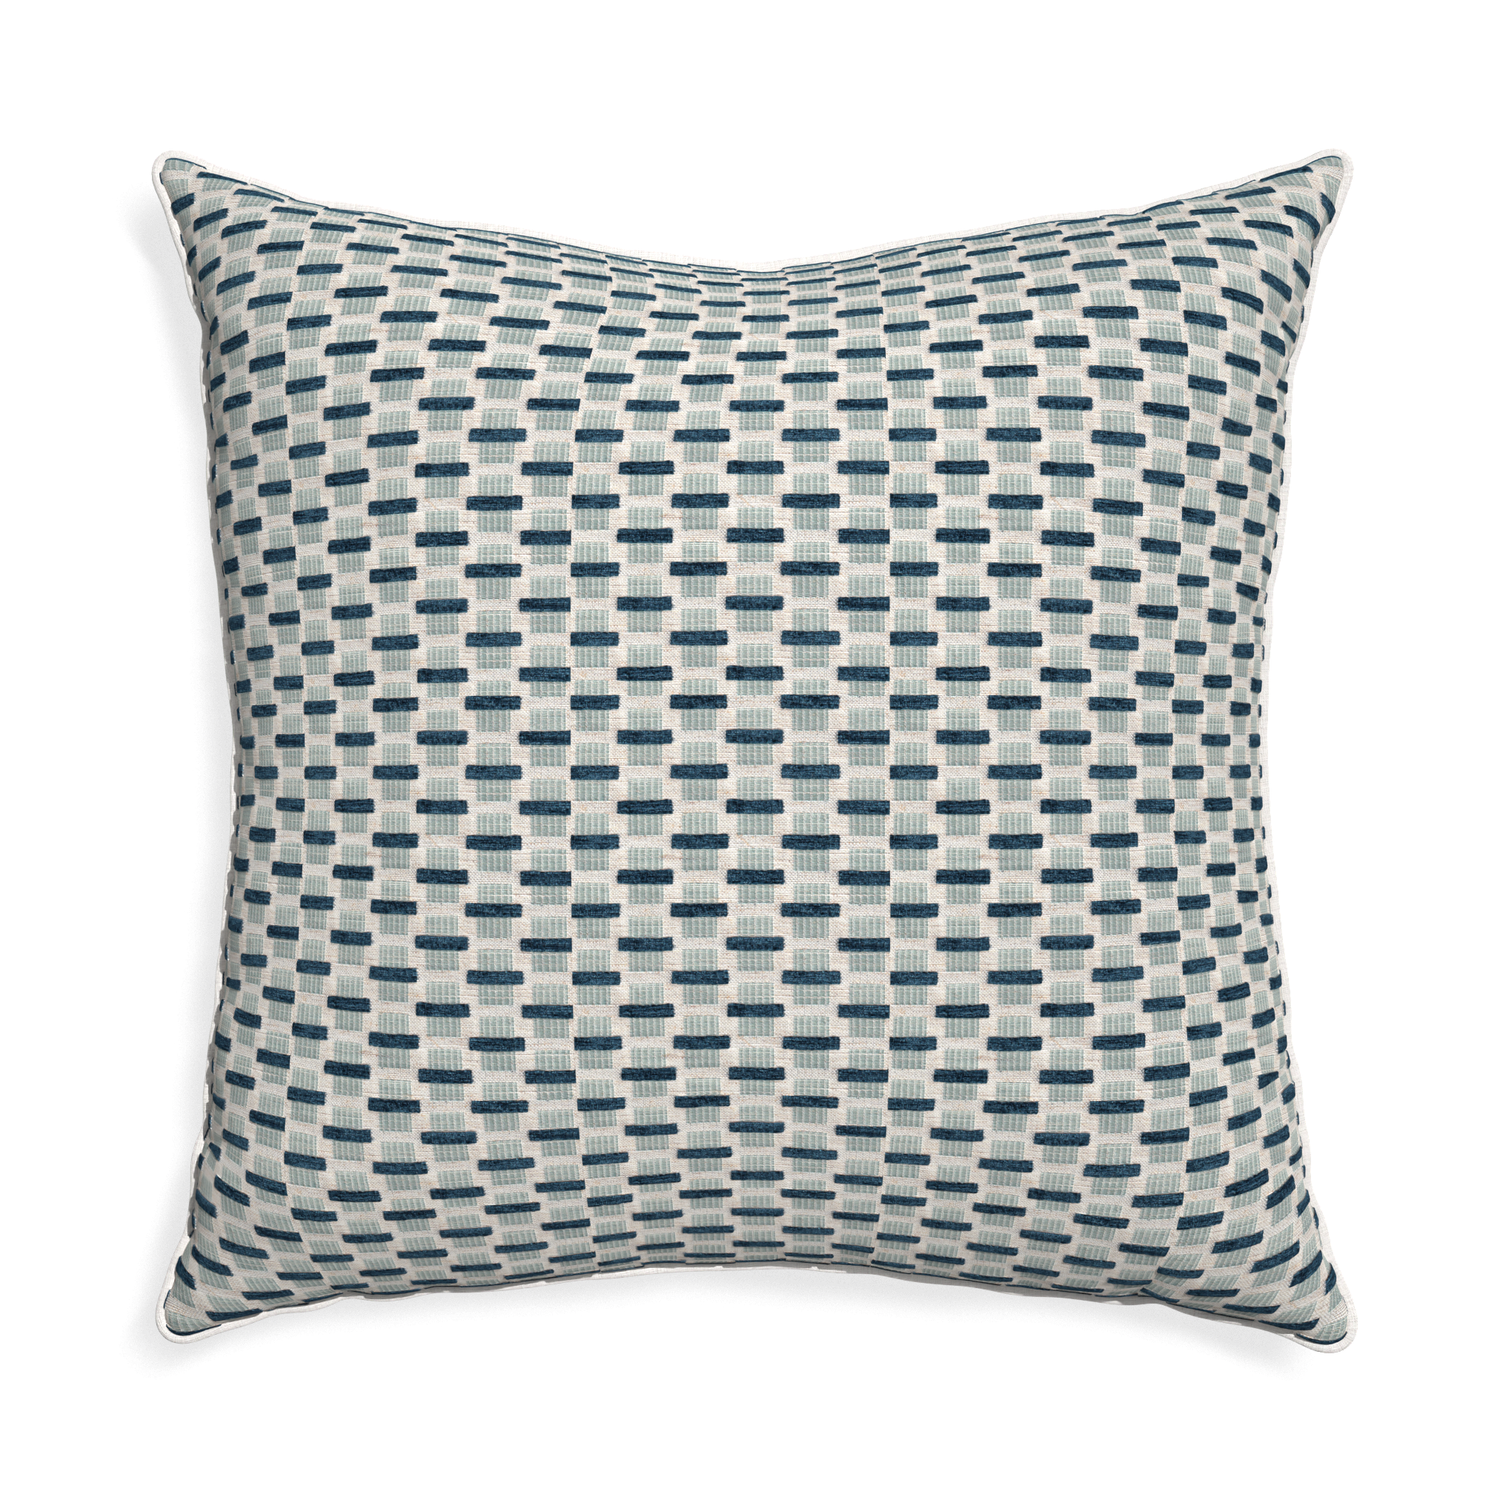 Euro-sham willow amalfi custom blue geometric chenillepillow with snow piping on white background